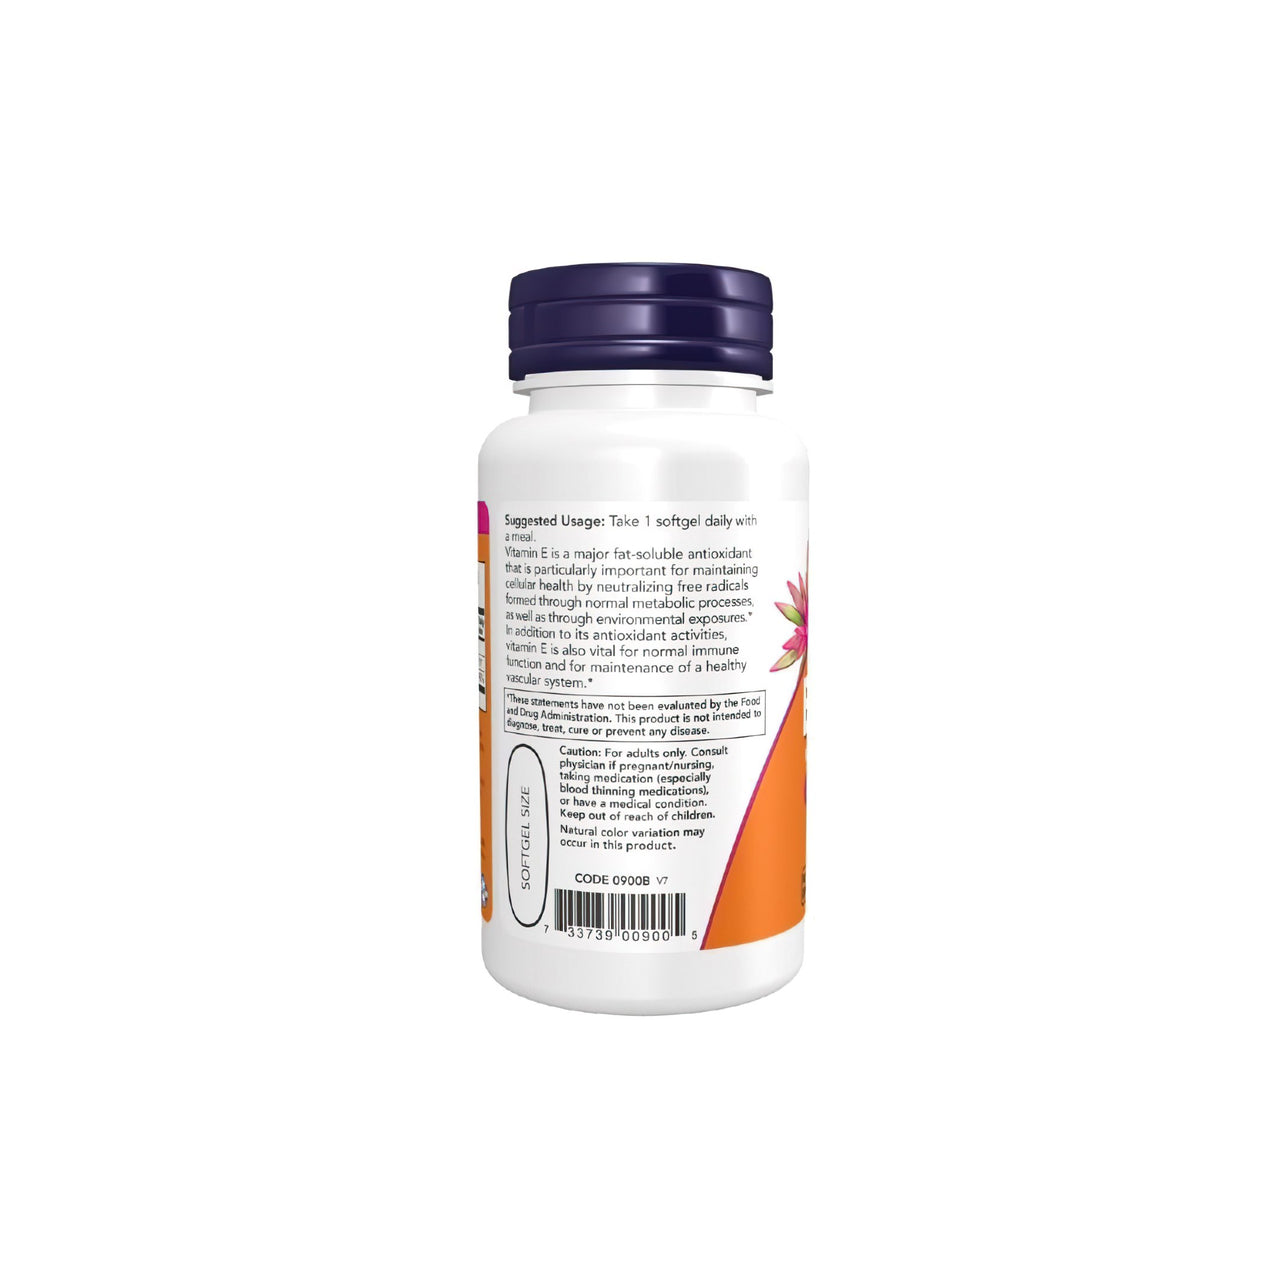 A bottle of Vitamin E-1000 Mixed Tocopherols 50 Softgels by Now Foods, a natural antioxidant, on a white background.